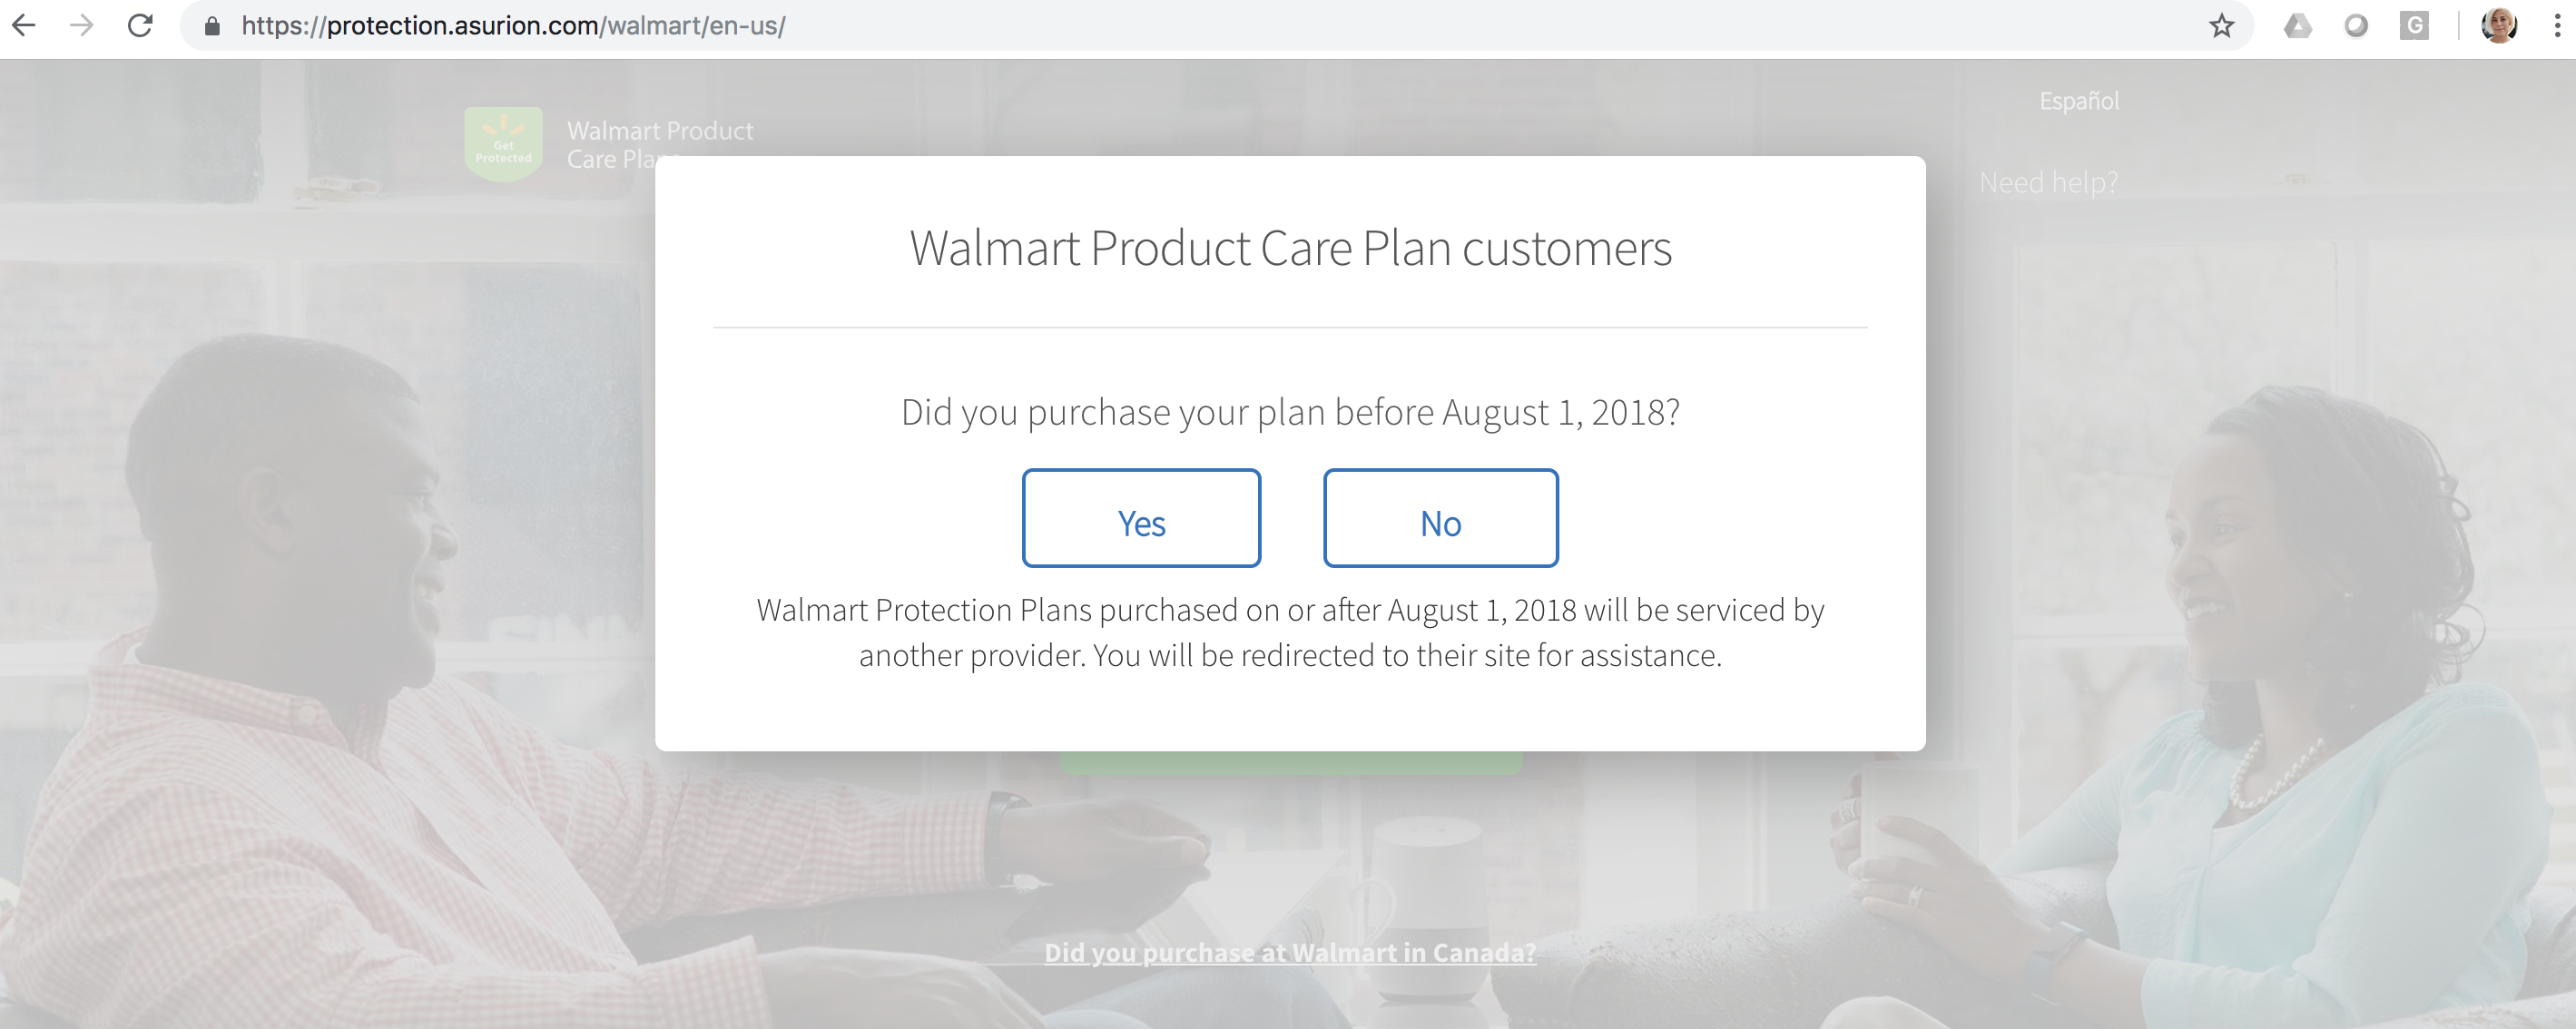 Allstate Now Powering Walmart Protection Plans Allstate Protection Plans/sam's Club File A Claim